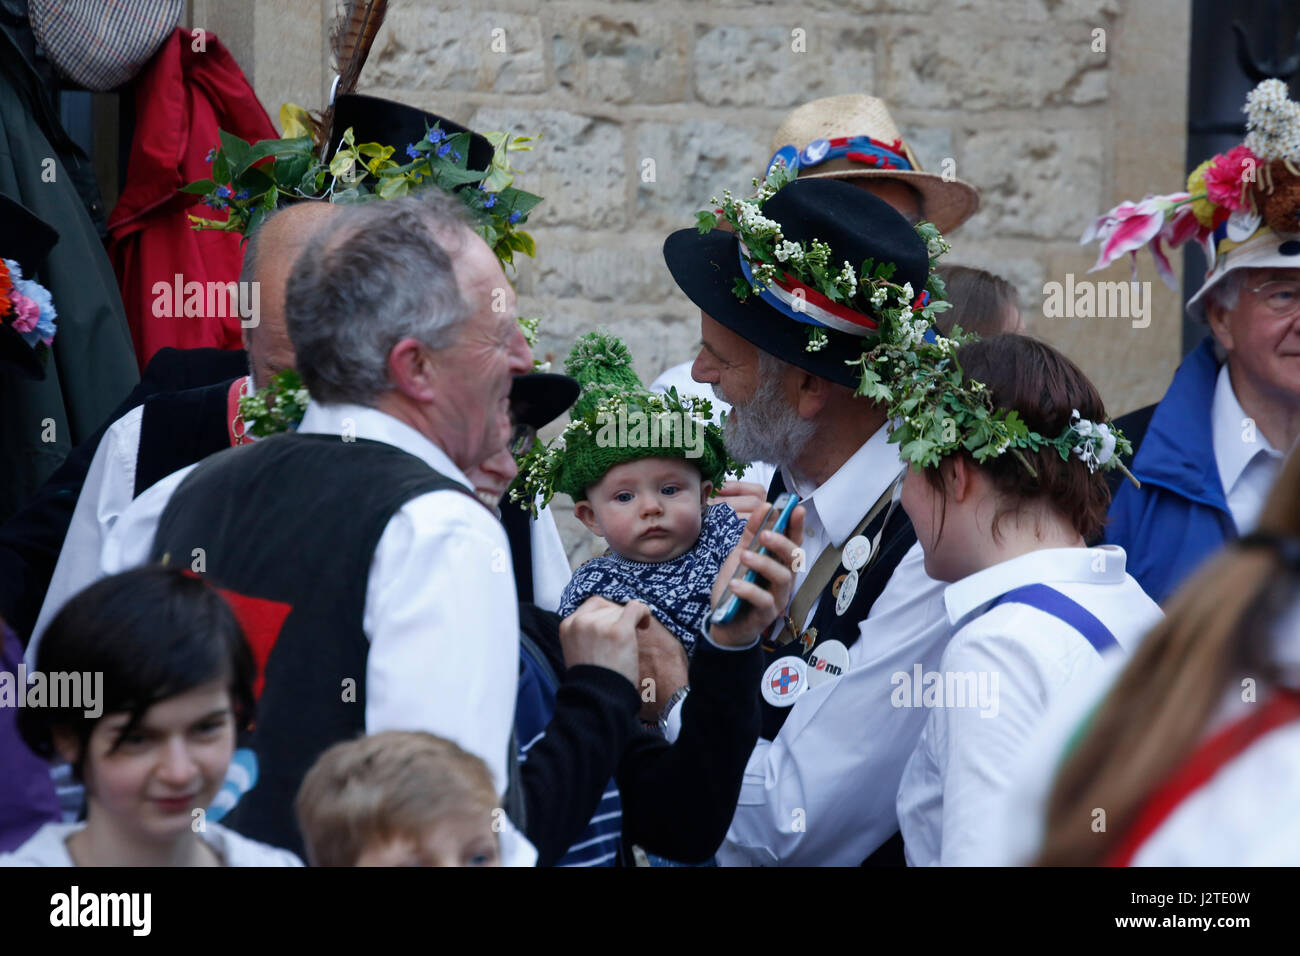 Oxford, UK. 1 May 2017. Crowds celebrate May Day in Oxford by festooning their hats with sprigs of flowers such as hawthorn. Whole families enjoy the festivities, from babies to grandparents. Crowds celebrate May morning in Oxford by watching the Morris men dance in front of Hertford College's Bridge of Sighs with the sun rising behind the bridge. May morning is traditionally celebrated in Oxford with a choir singing from the top of Magdalen College Tower after which the crowds are lead through the streets by Morris men who perform at various sites throughout the city. Stock Photo